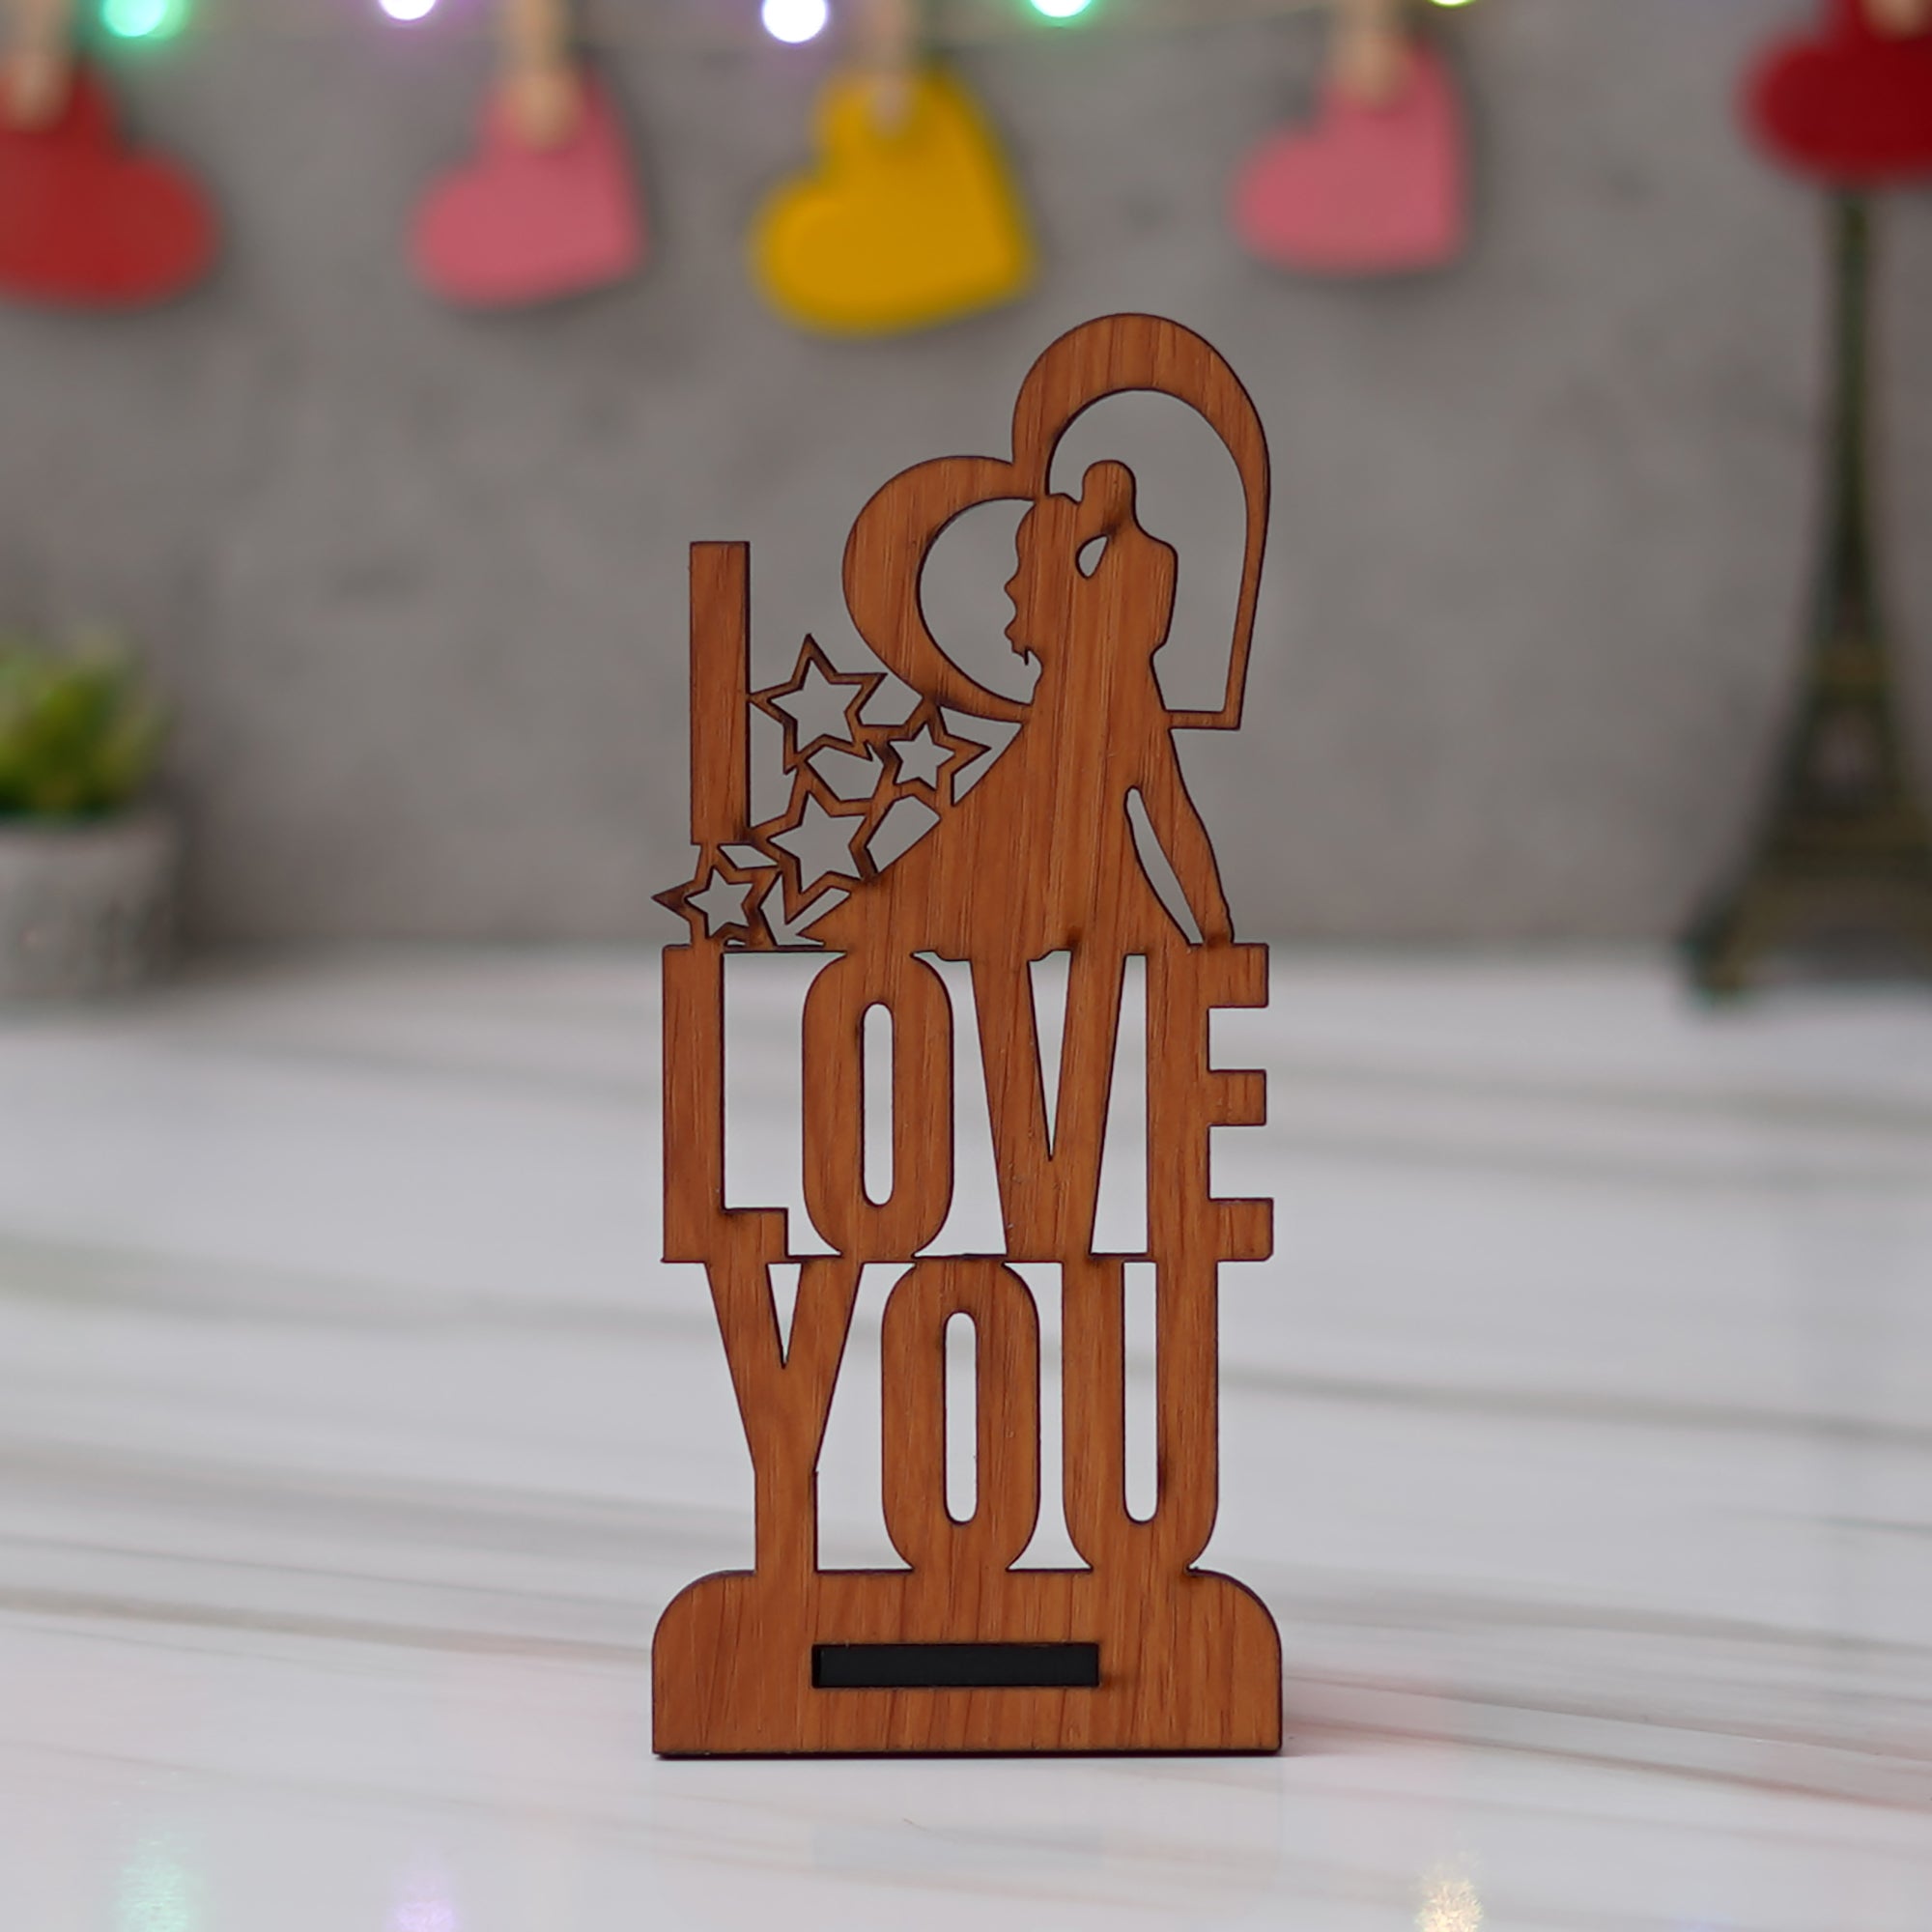 Valentine Combo of Golden Rose Gift Set, "Love You" Wooden Showpiece With Stand, Bride Kissing Groom Romantic Polyresin Decorative Showpiece 3